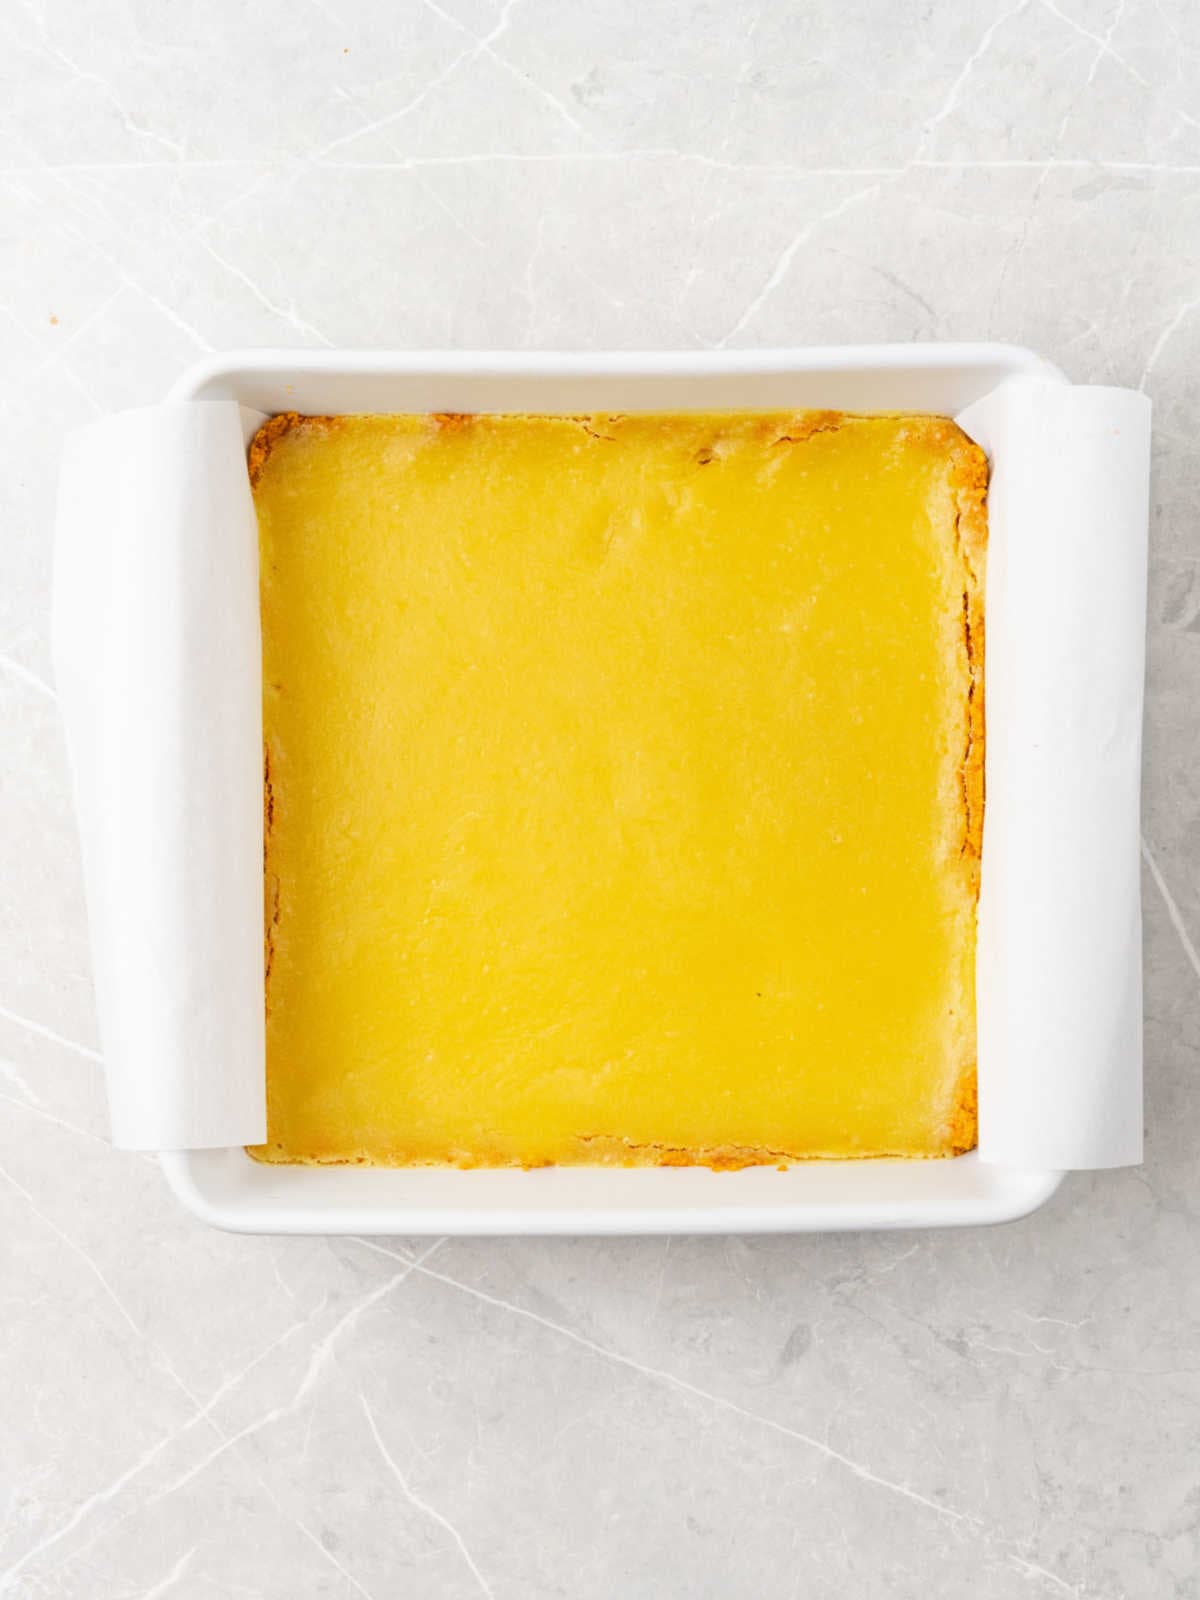 Baked white pan with lemon bars on a light gray surface.